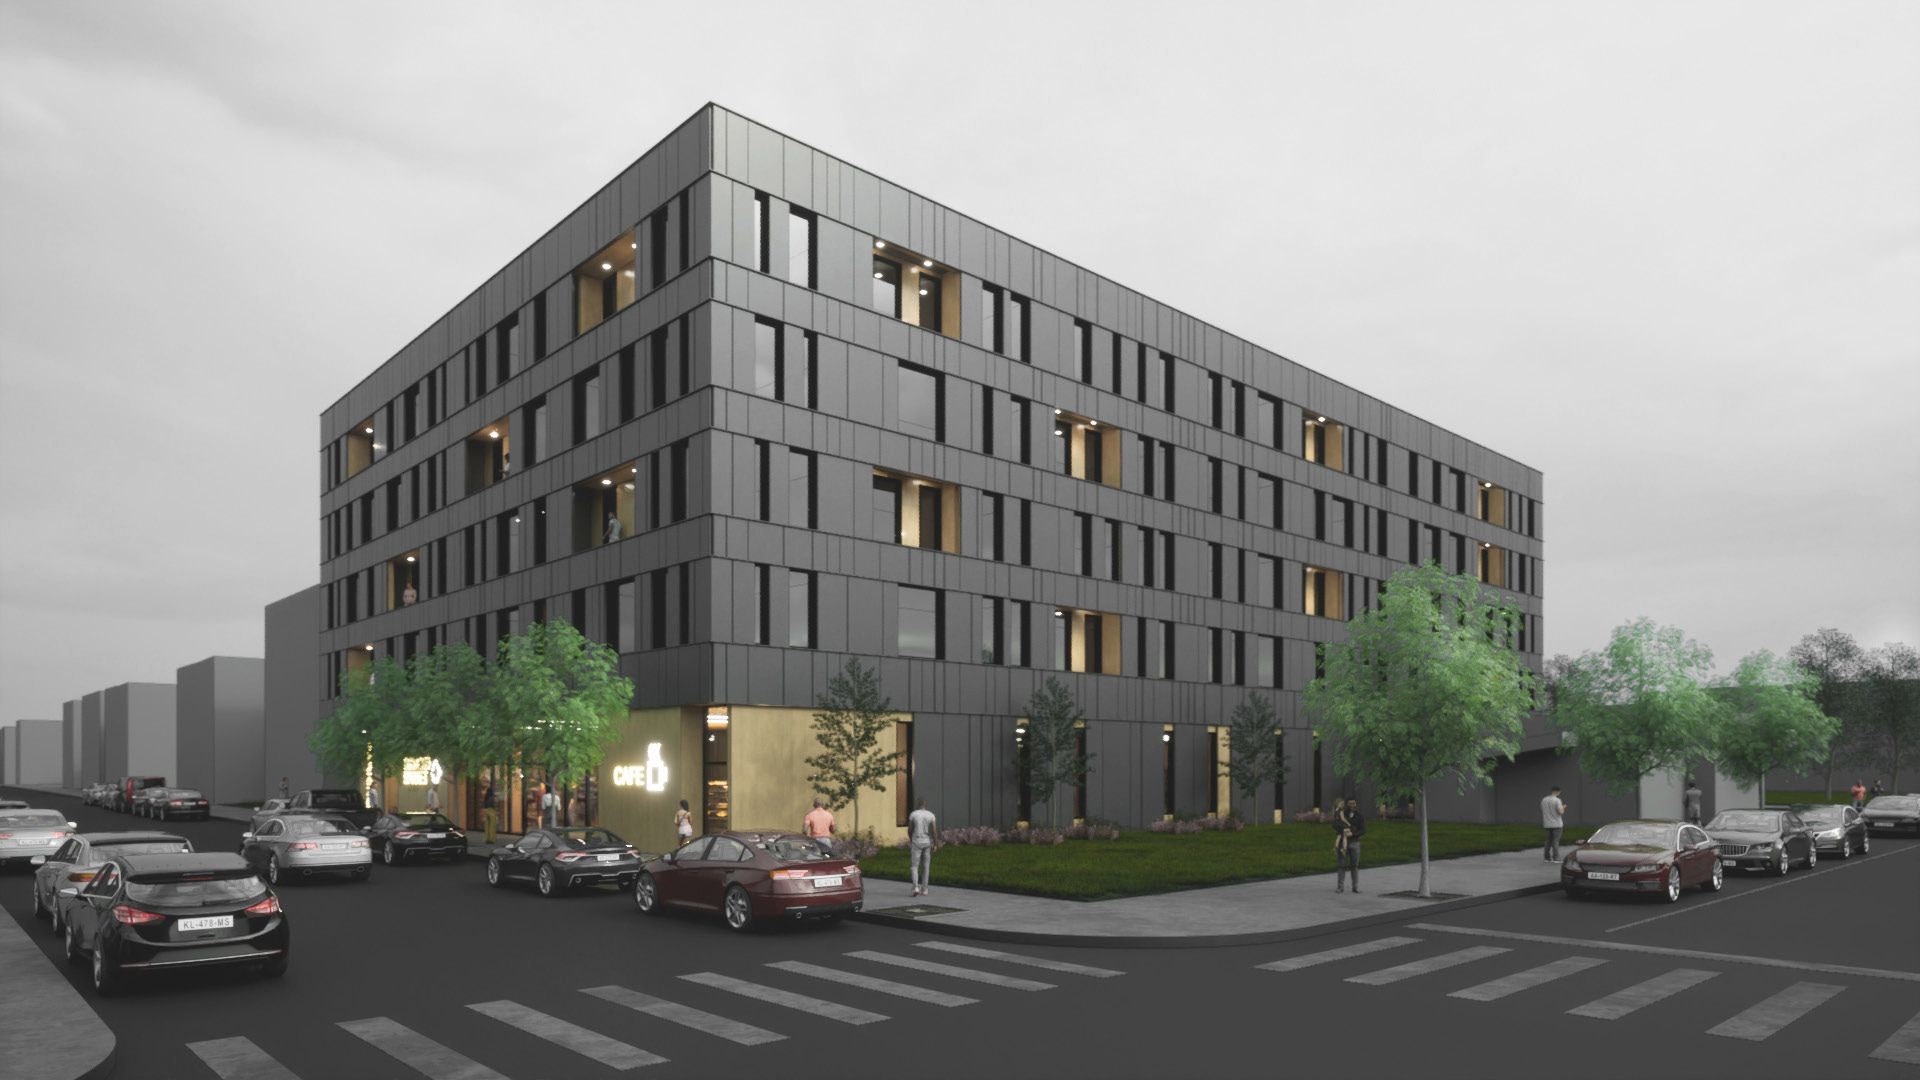 2024-28 North 22nd Street. Building rendering. Credit: Oombra Architects via the Civic Design Review